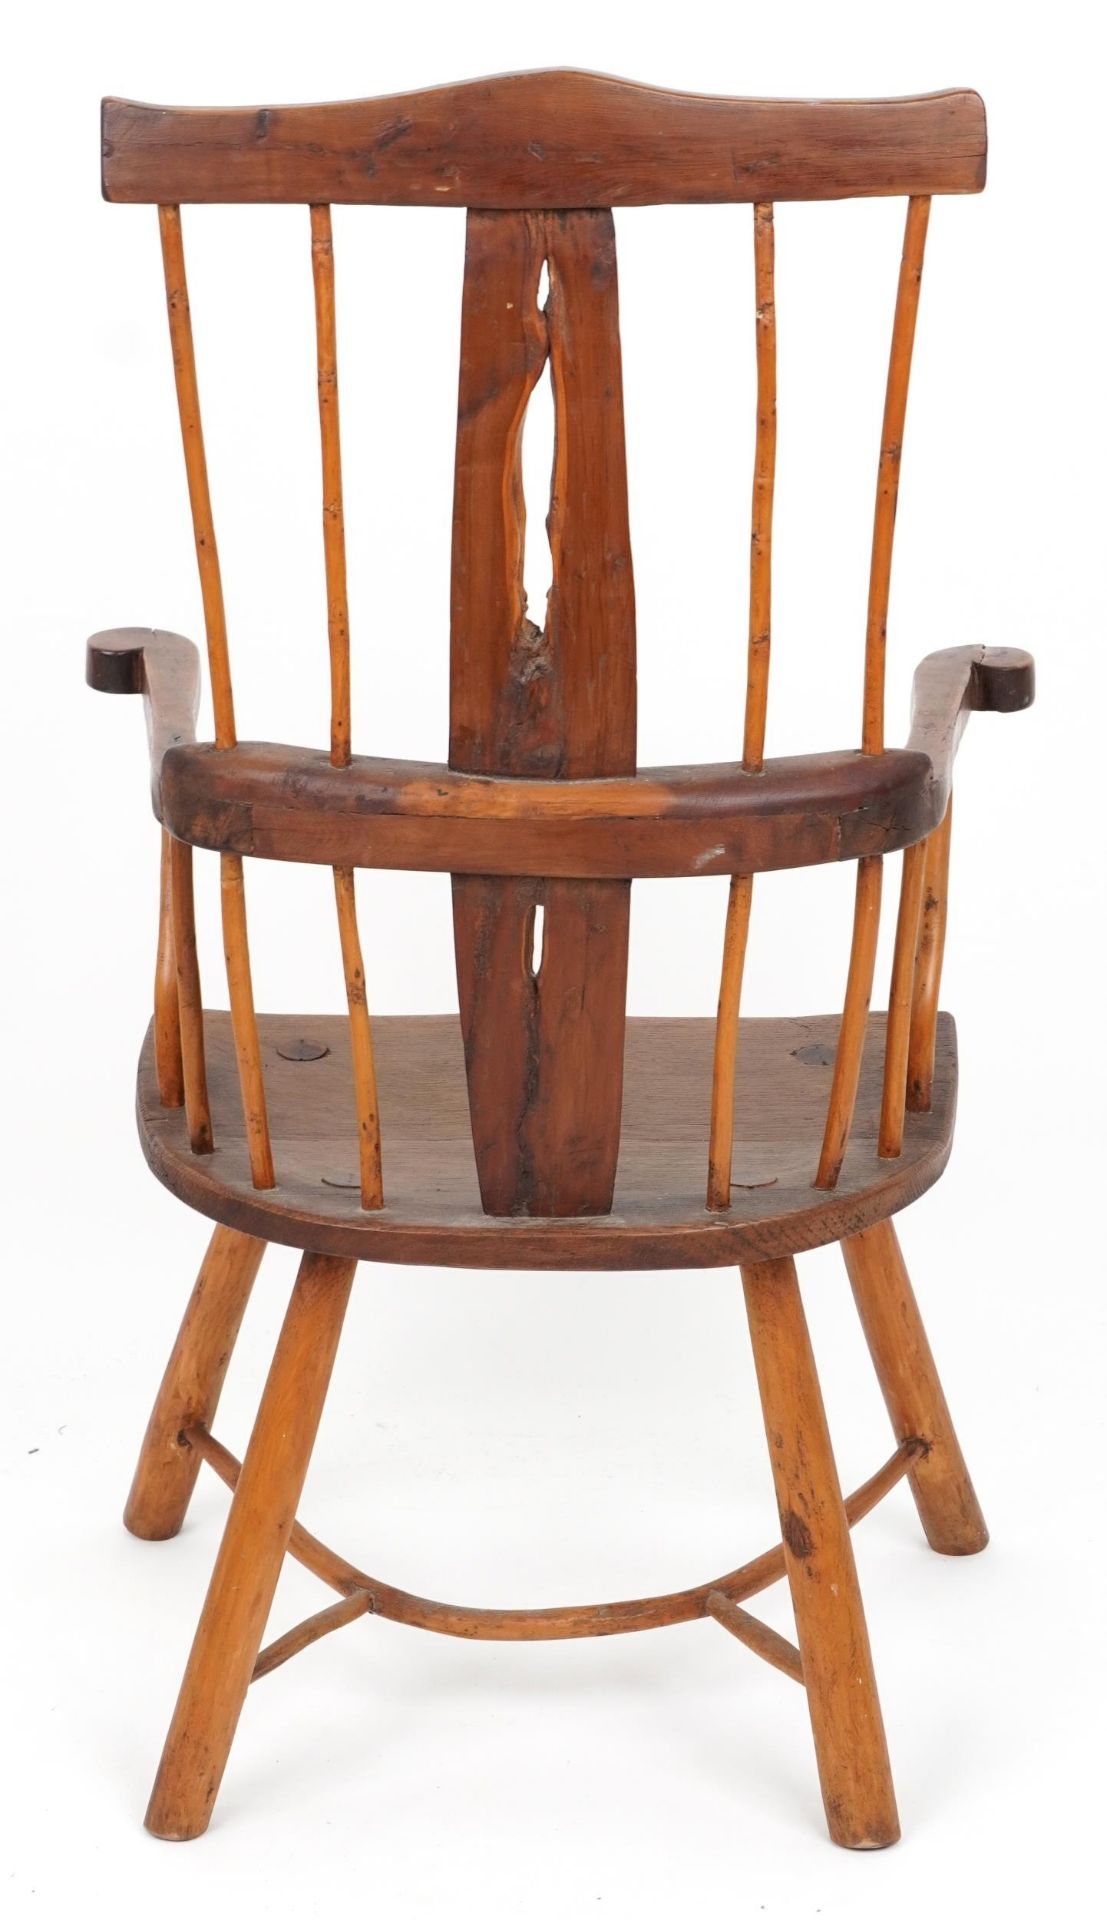 Antique country spindle back chair with pierced splat, 101cm high - Image 4 of 4